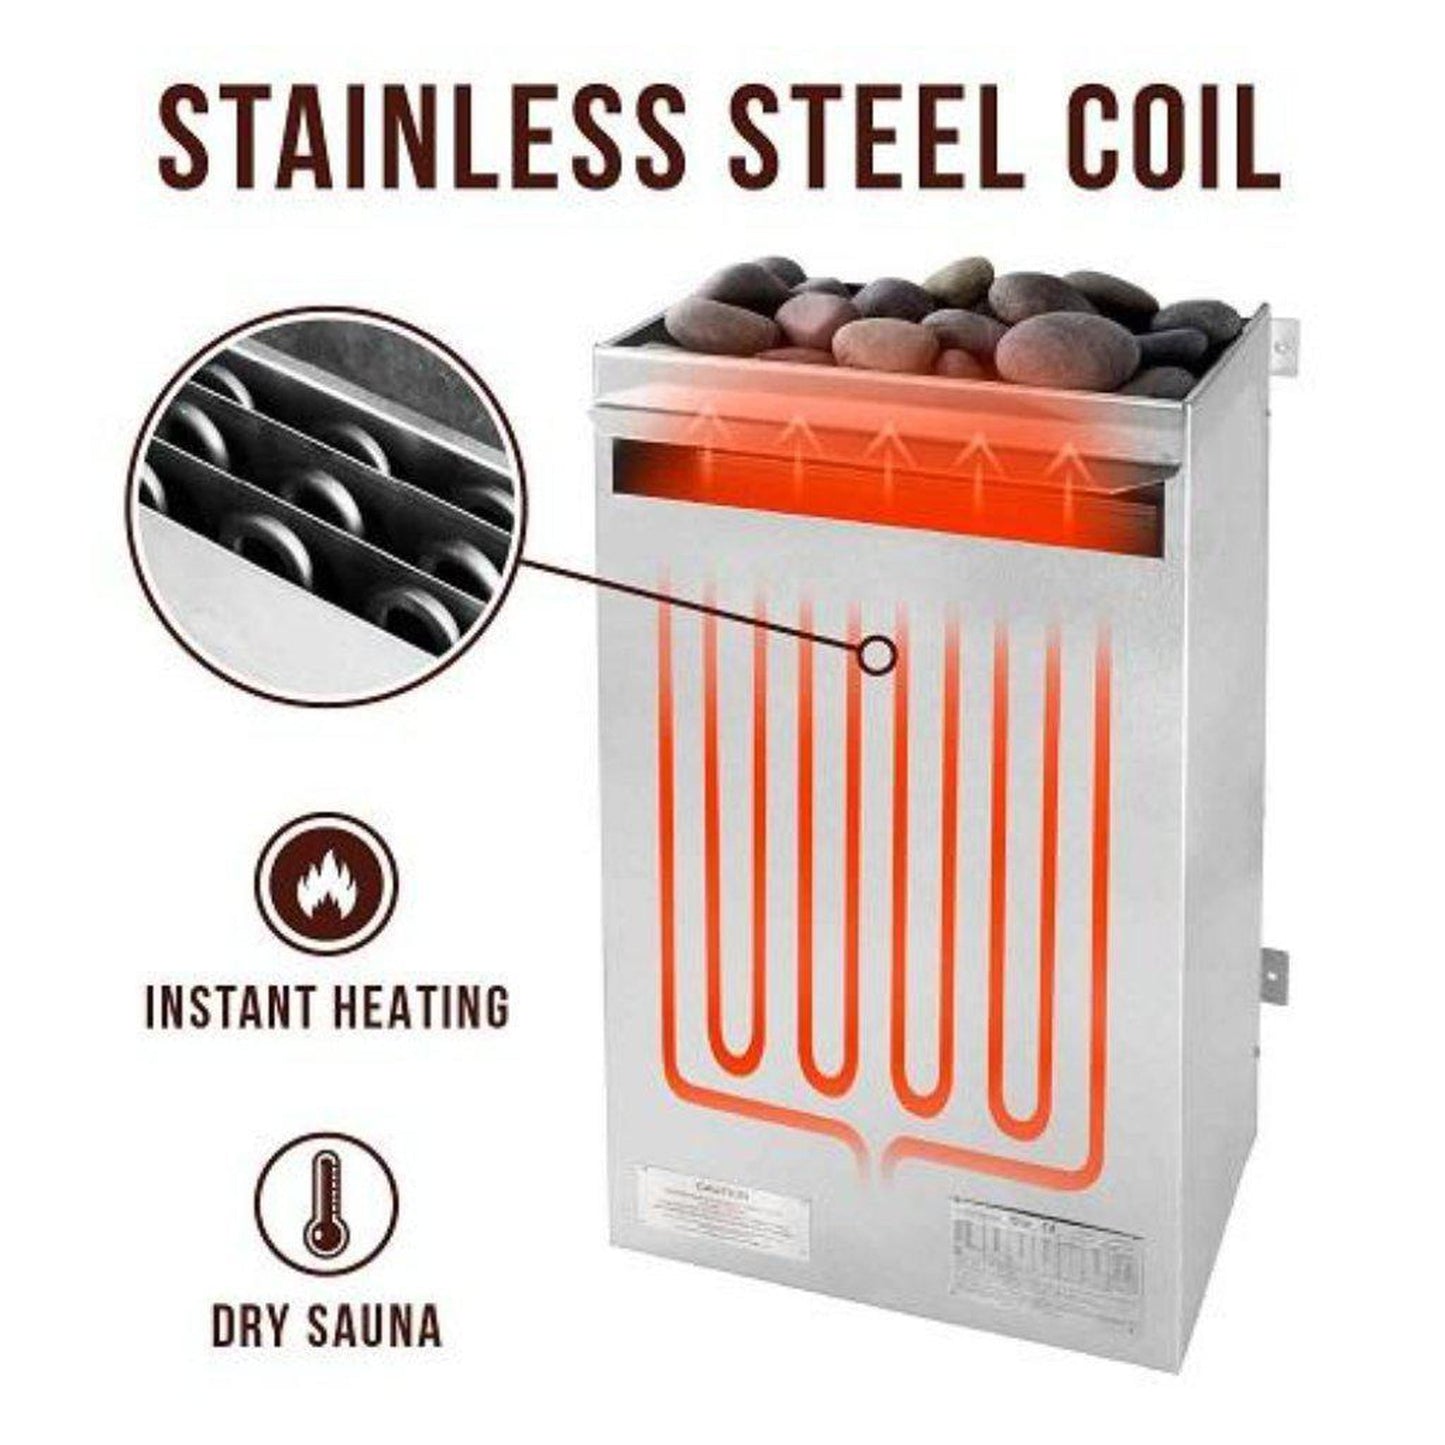 Scandia Manufacturing Electric Ultra 16" x 14" x 29" Wall Mounted Stainless Steel 9.0 kW 240V Medium Sauna Heater with Built-in Thermostat